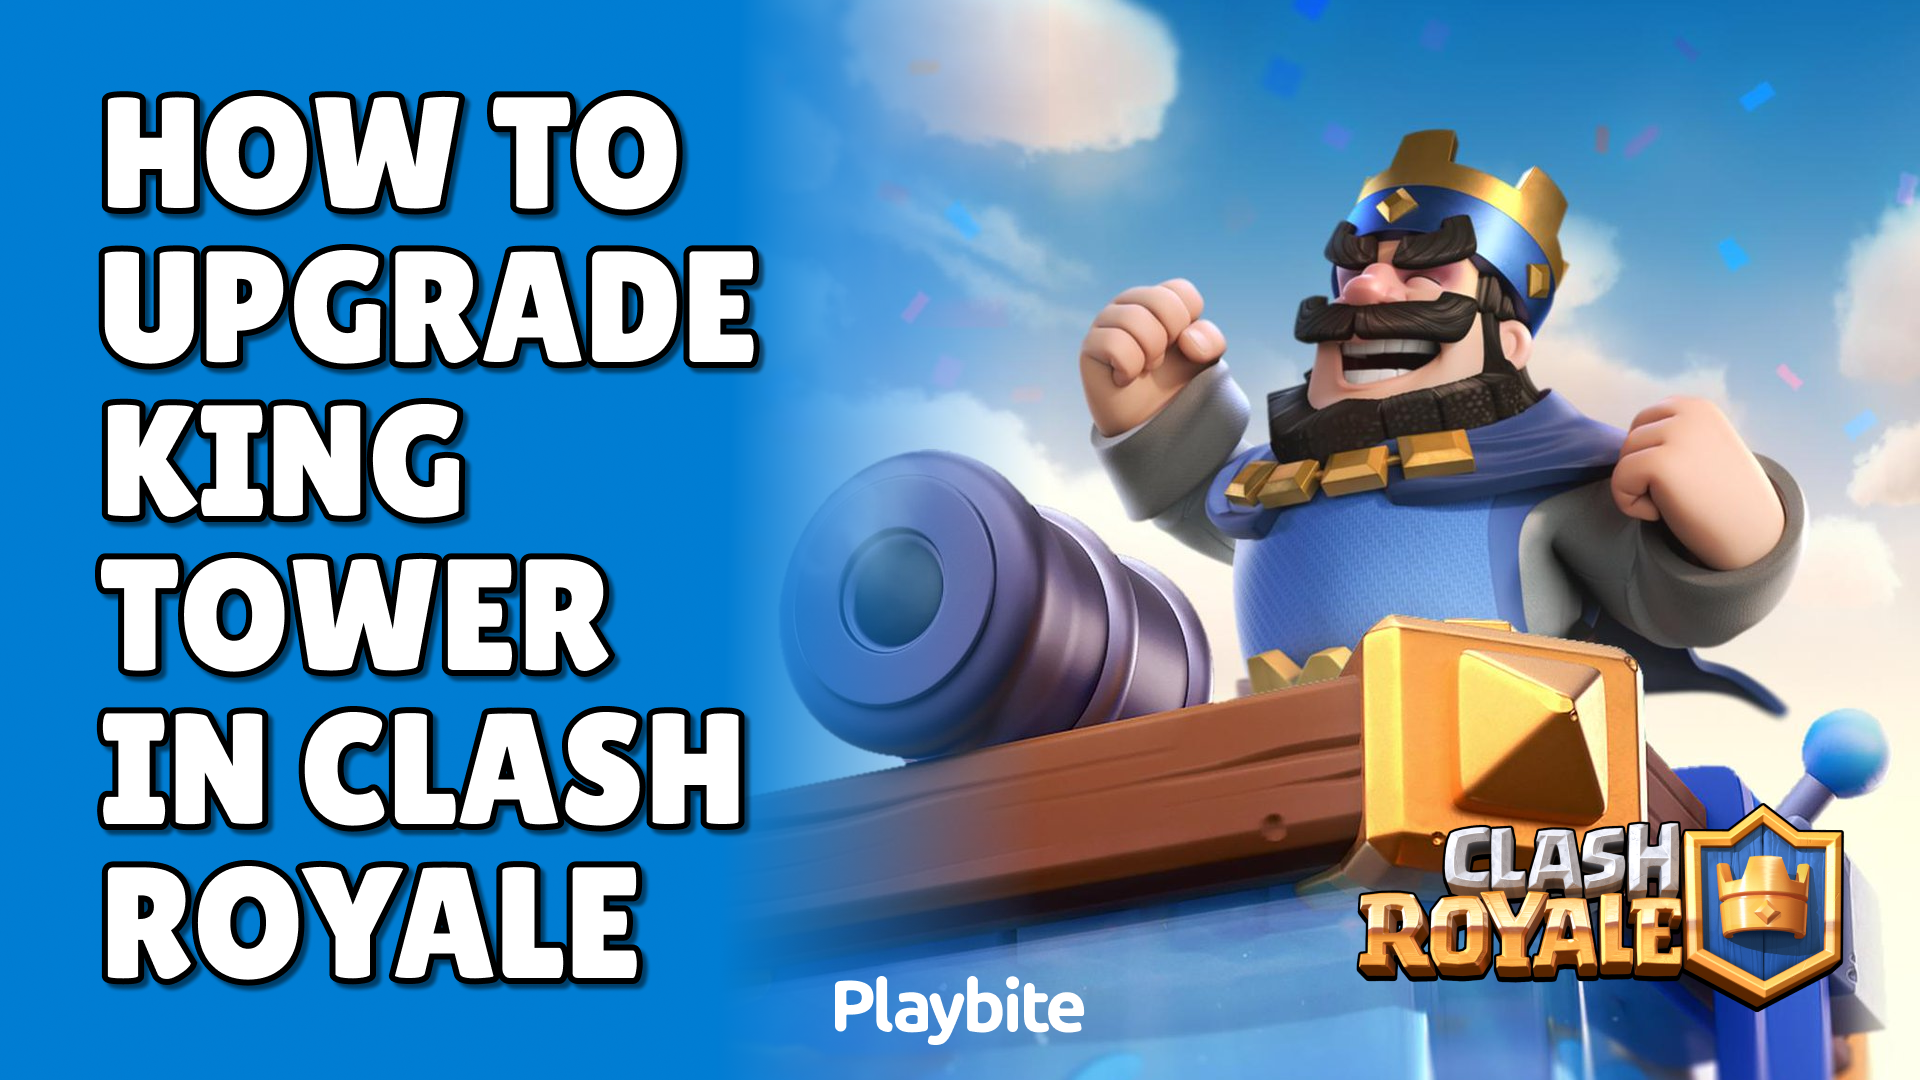 How To Upgrade King Tower In Clash Royale